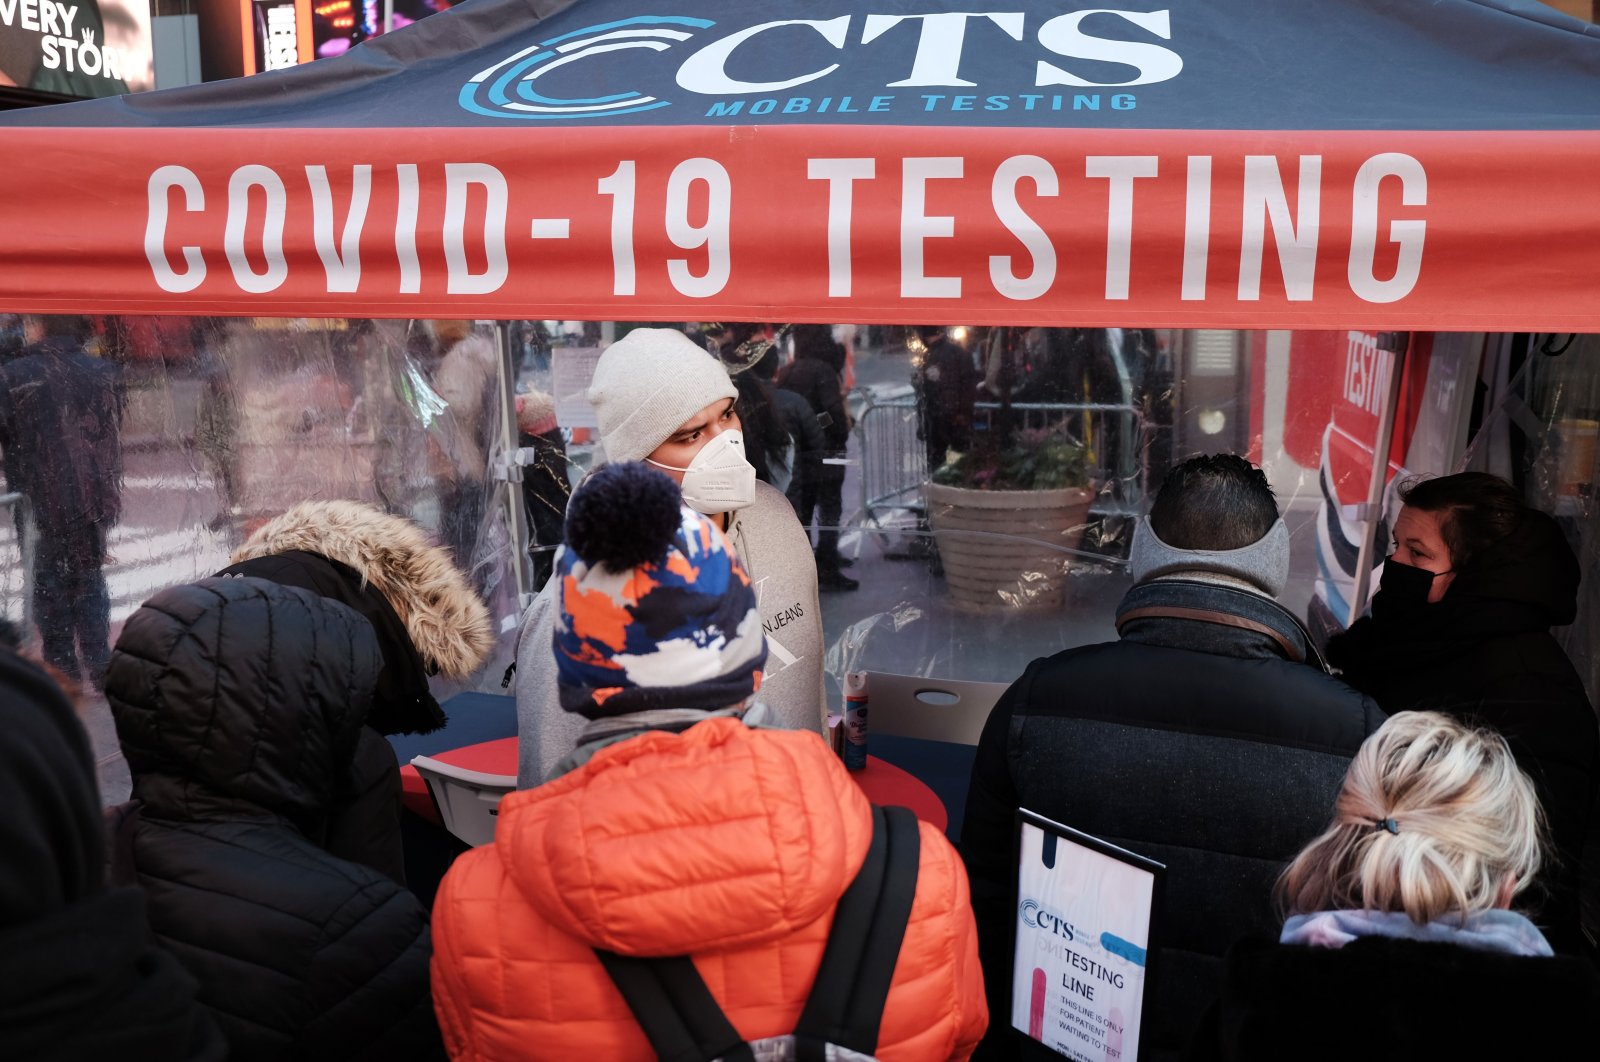 People wait in long lines in Times Square to get tested for COVID-19 in New York City, U.S., Dec. 20, 2021. (AFP Photo)